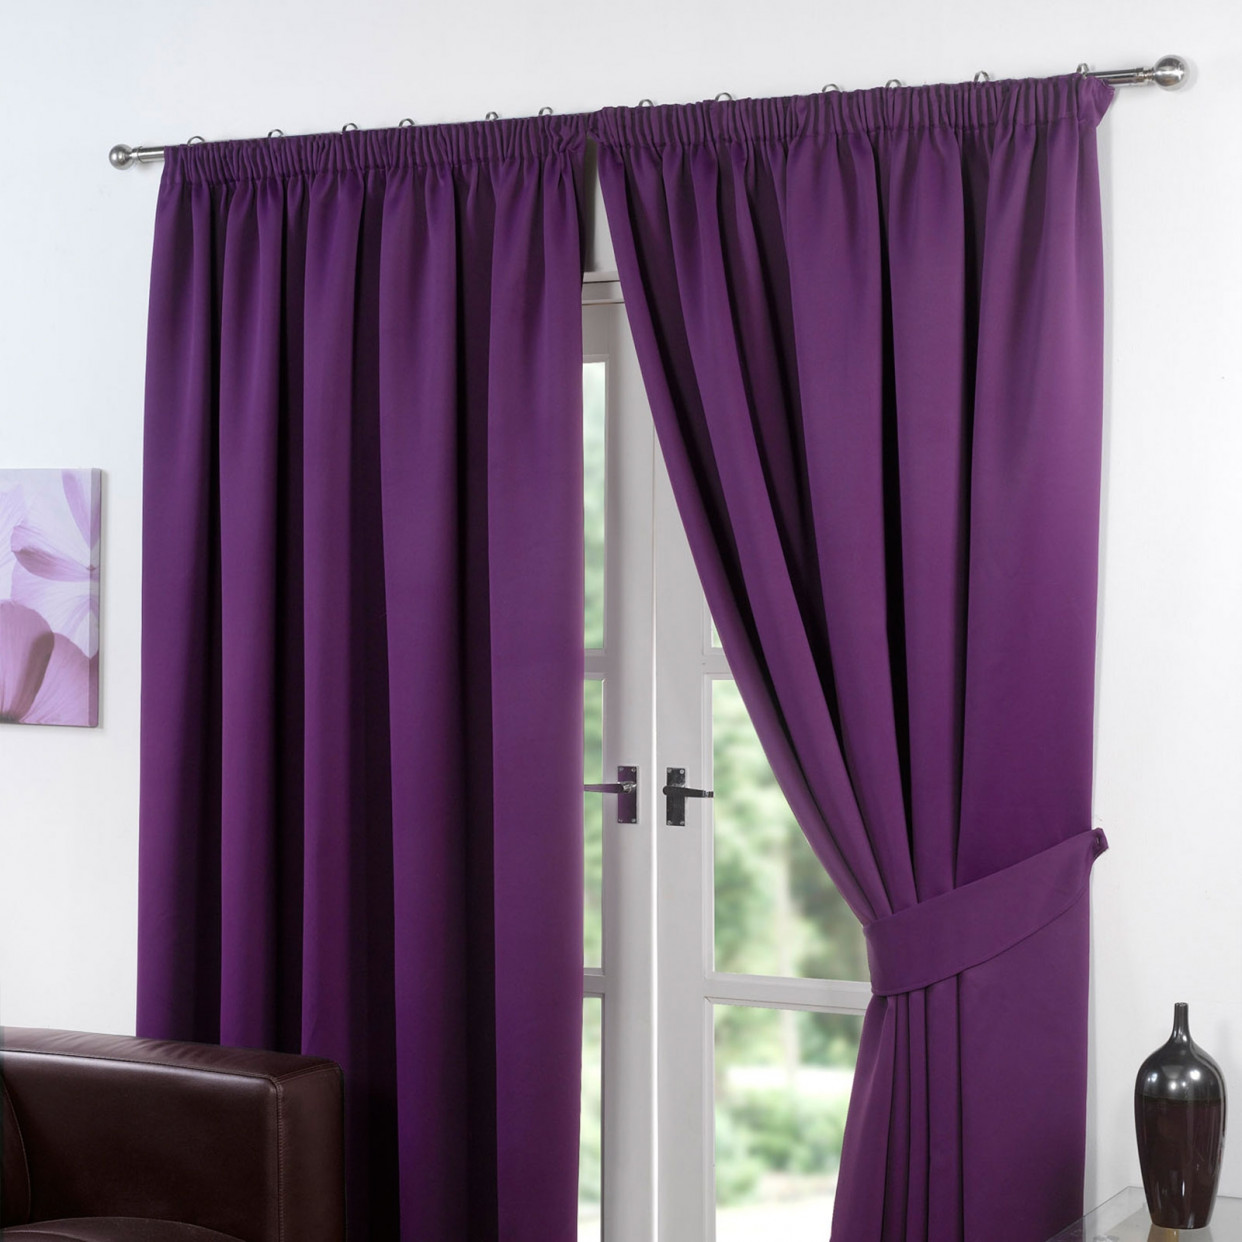 Pencil Pleat Thermal Blackout Fully Lined Curtains - Plum 46x72>